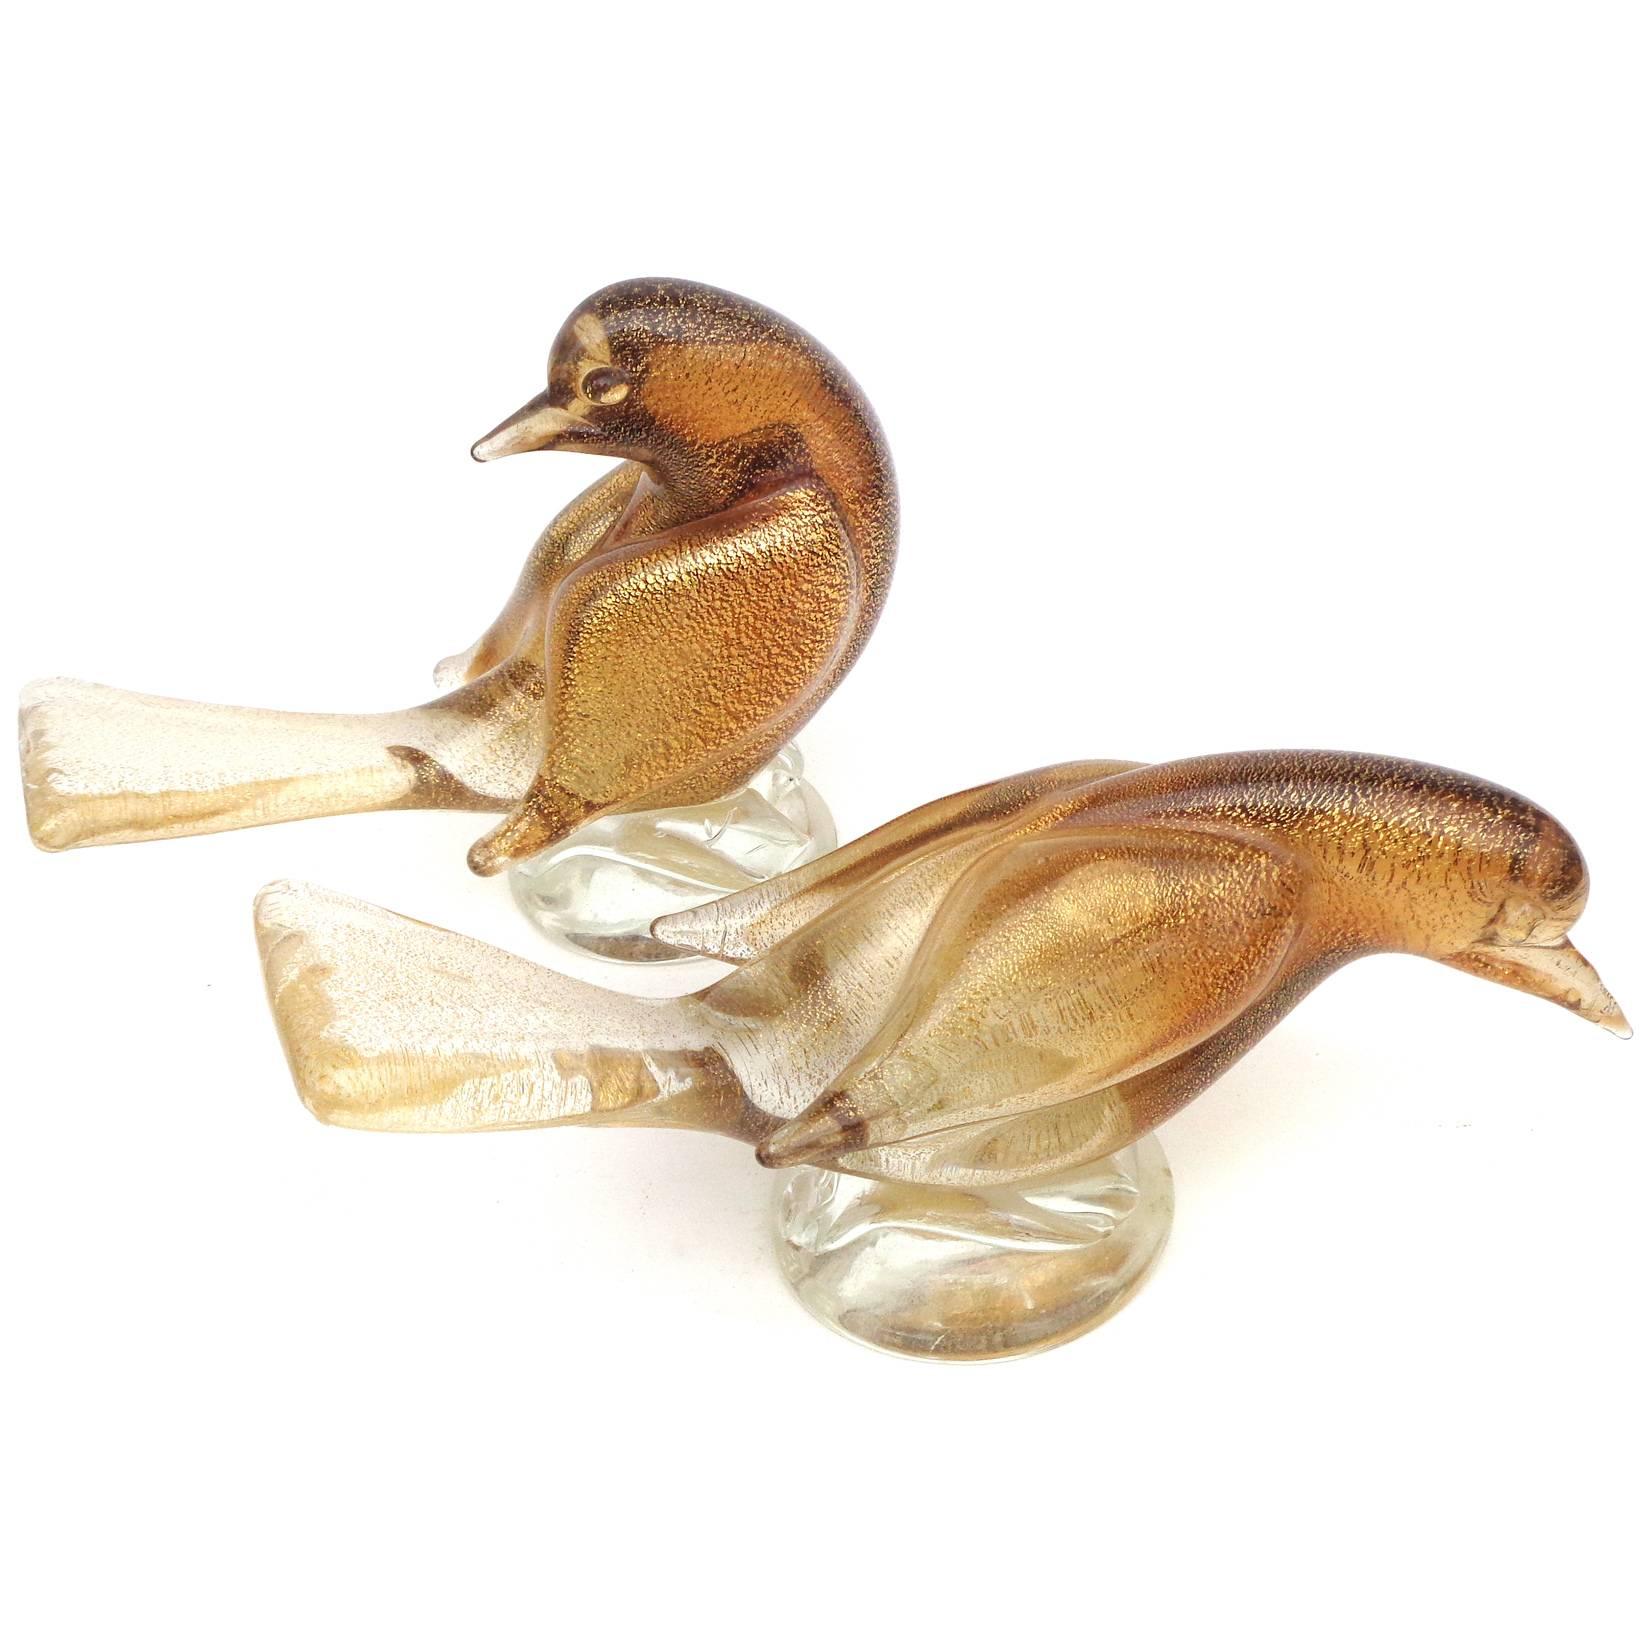 Beautiful set of vintage Murano hand blown Sommerso amber and gold flecks art glass dove bird sculptures / figurines. Documented to designer Archimede Seguso, with original labels underneath. Would make a great display piece on any desk, vanity or